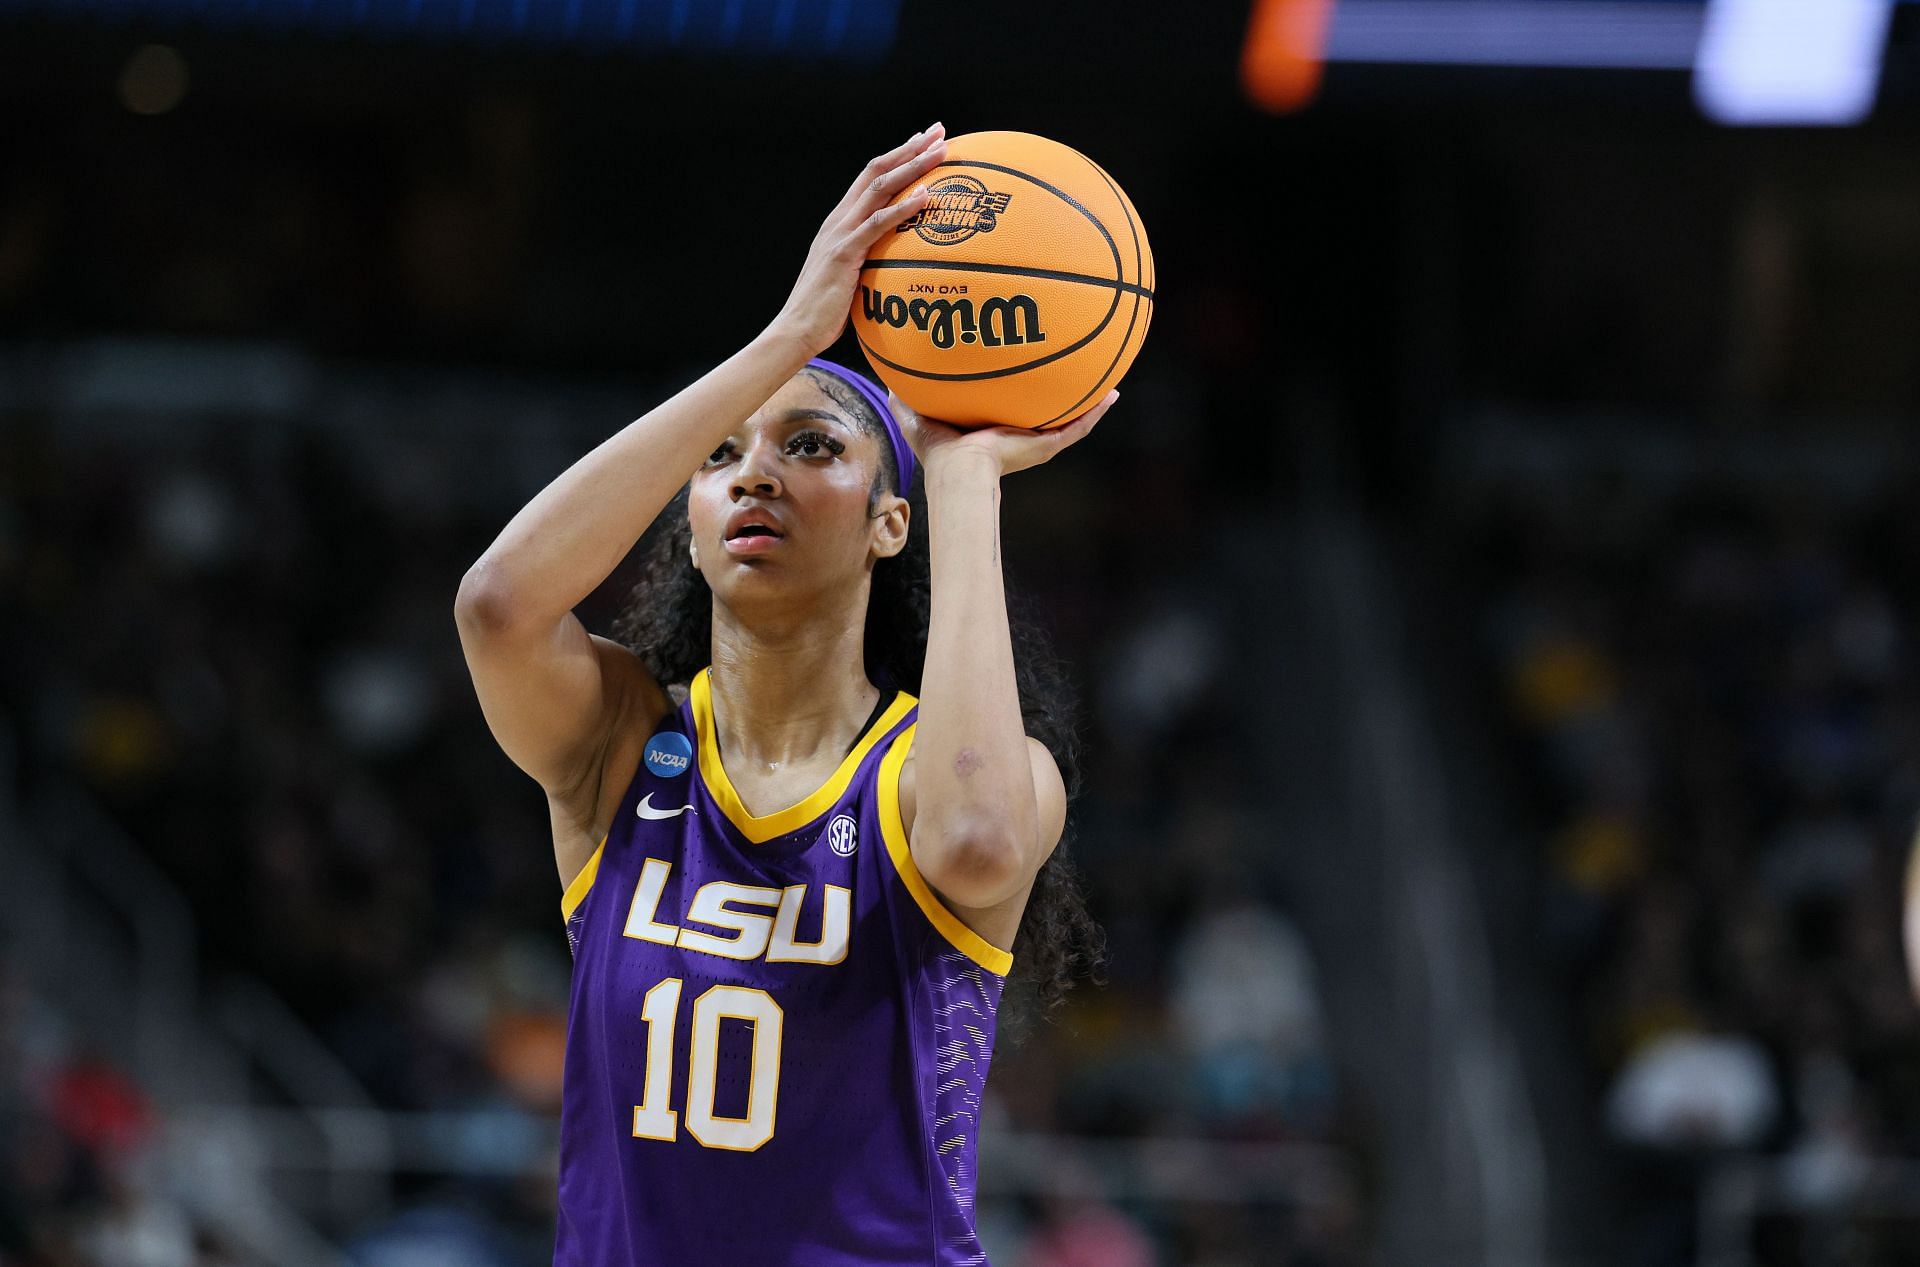 Despite a disappointing senior season, Angel Reese remains a likely first-round WNBA Draft pick.